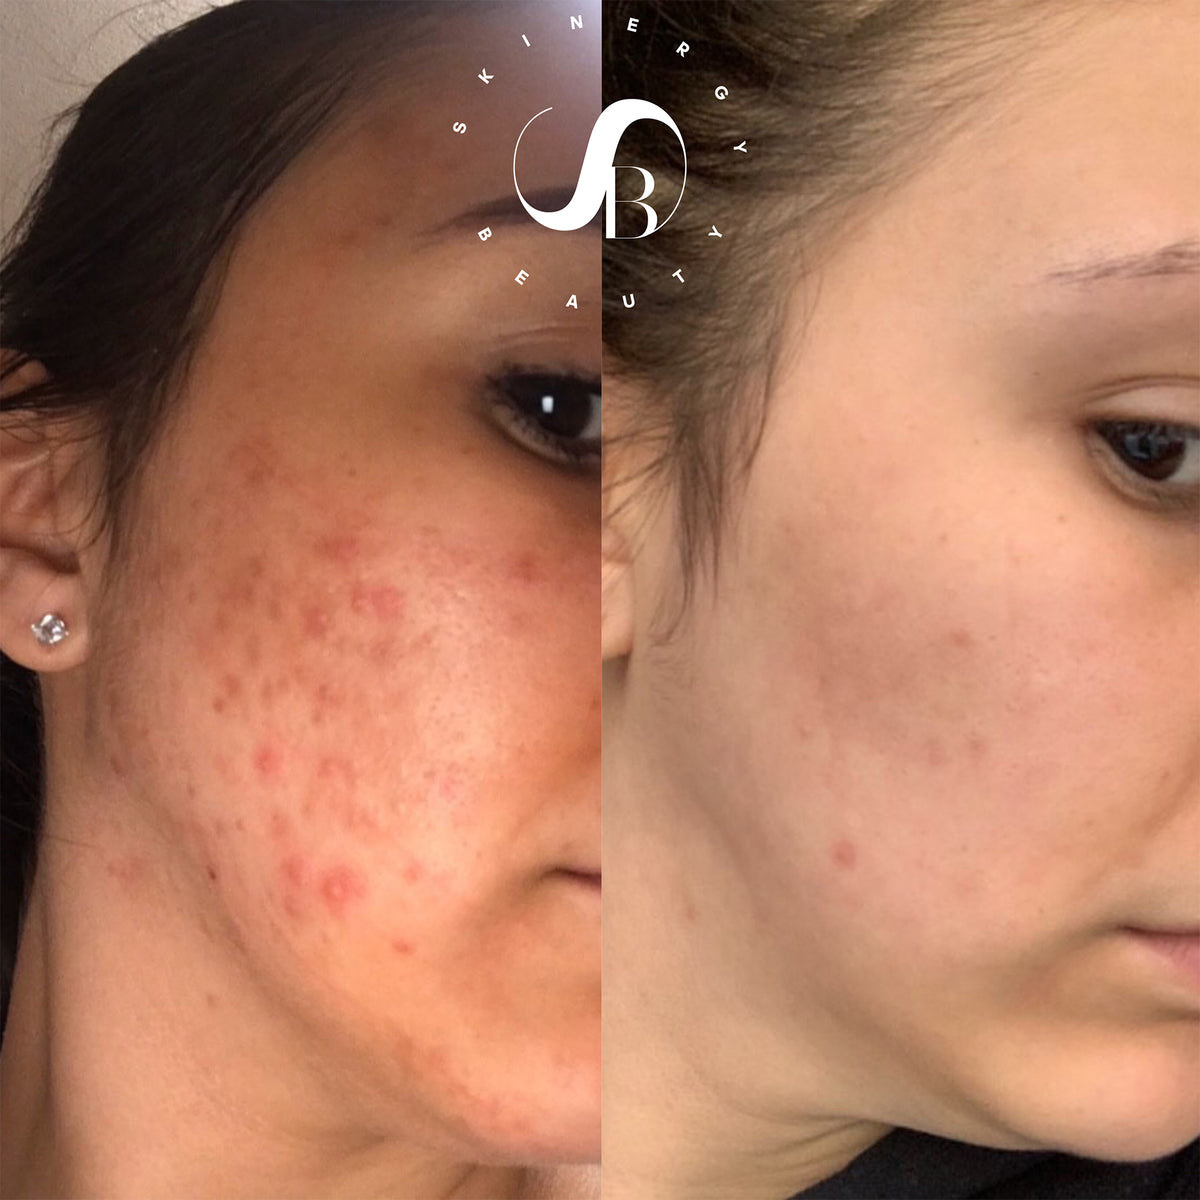 on the left, a reviewer with blemishes on their cheek and, on the right, the same reviewer with most of the blemishes cleared away